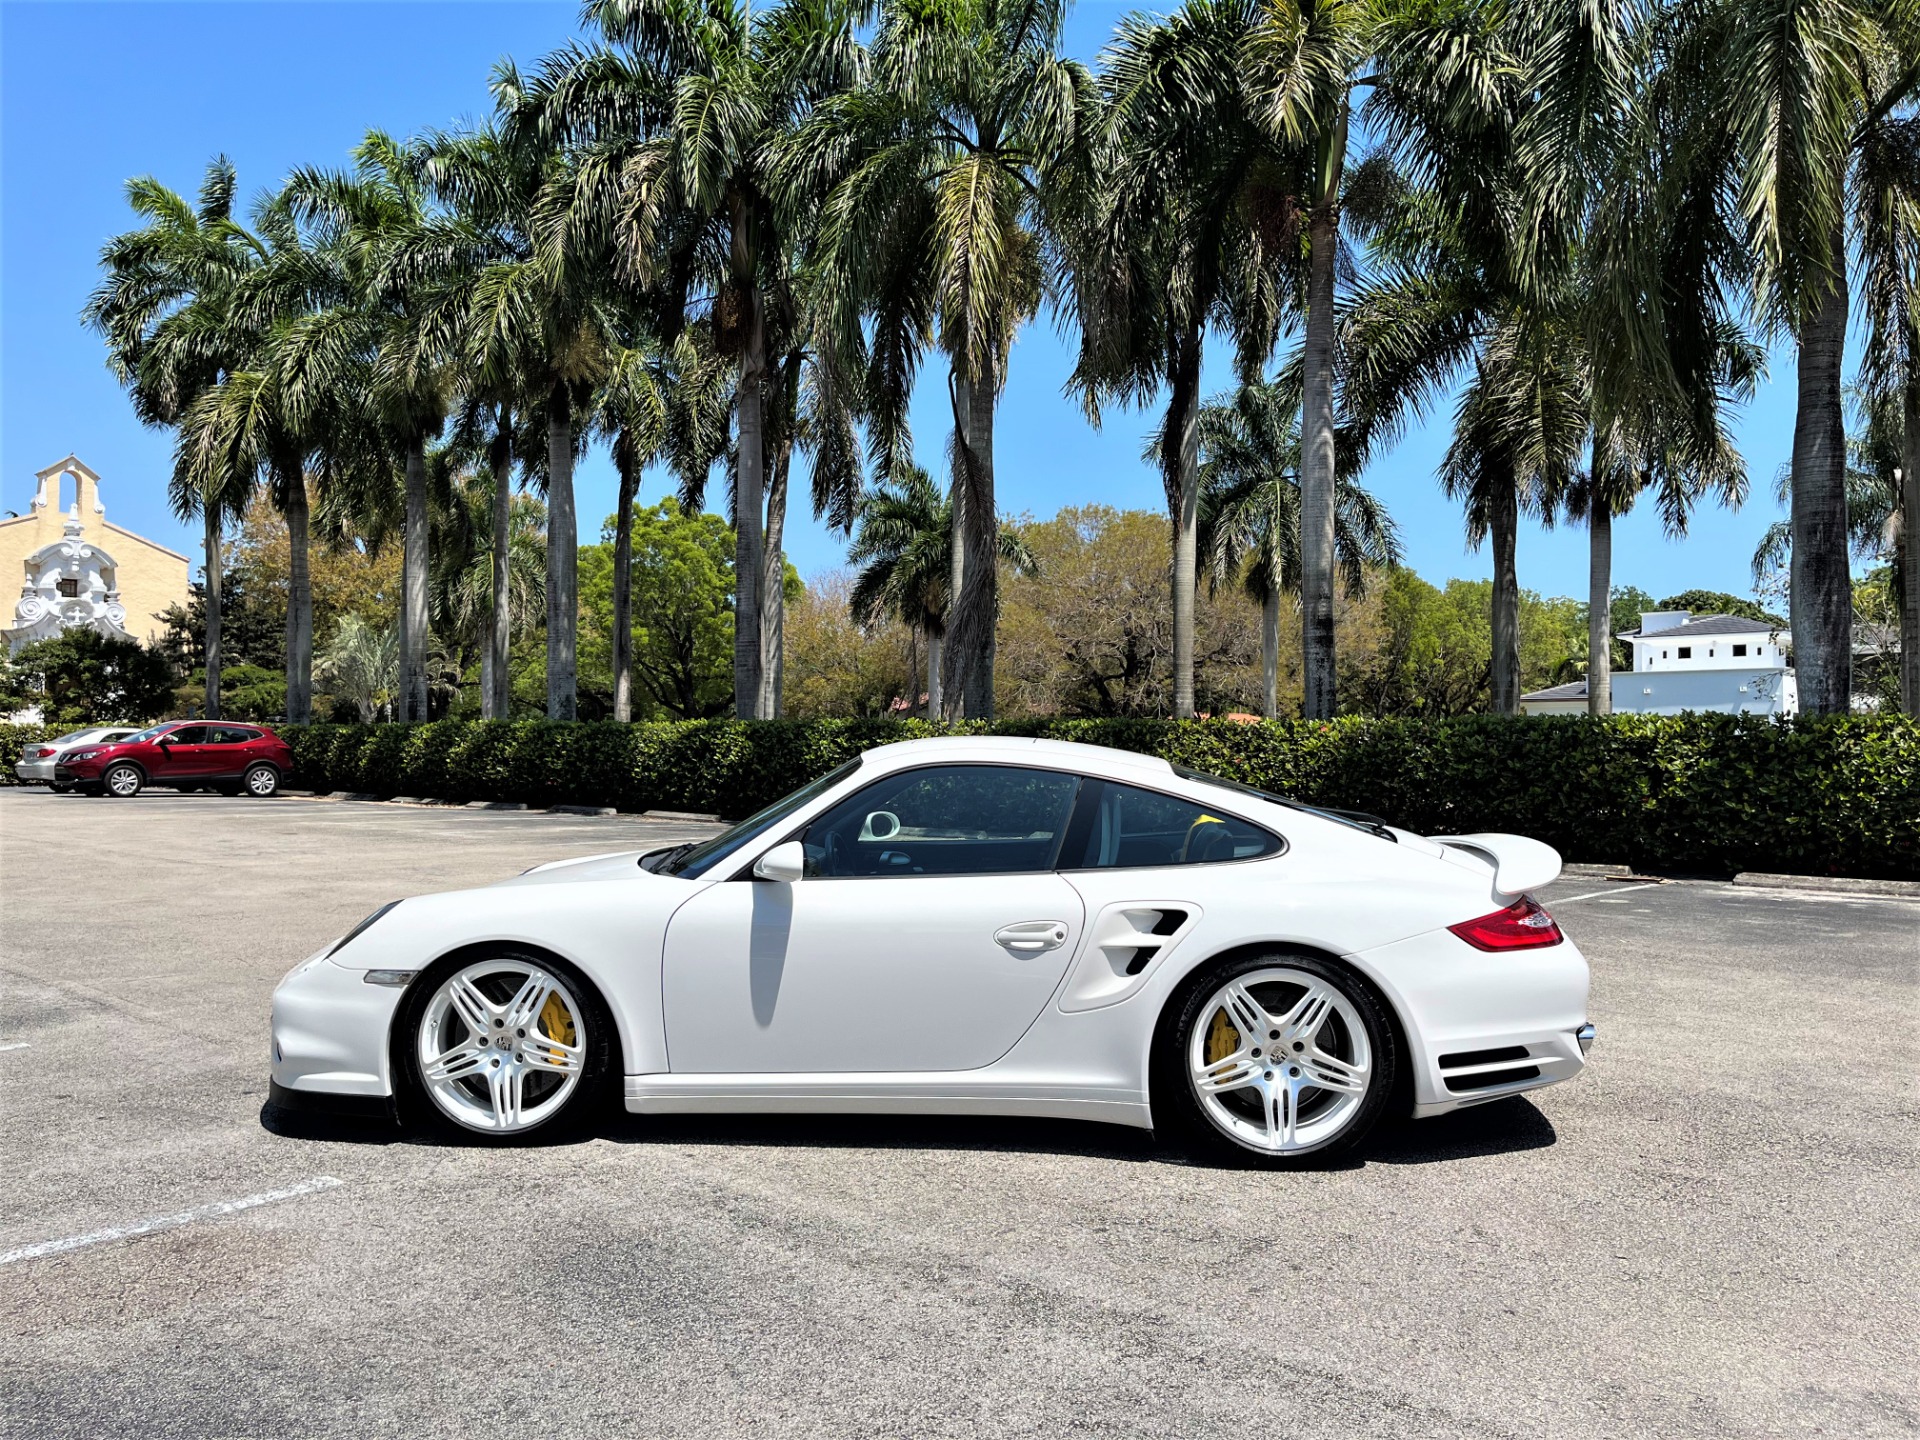 Used 2008 Porsche 911 Turbo for sale $124,850 at The Gables Sports Cars in Miami FL 33146 3